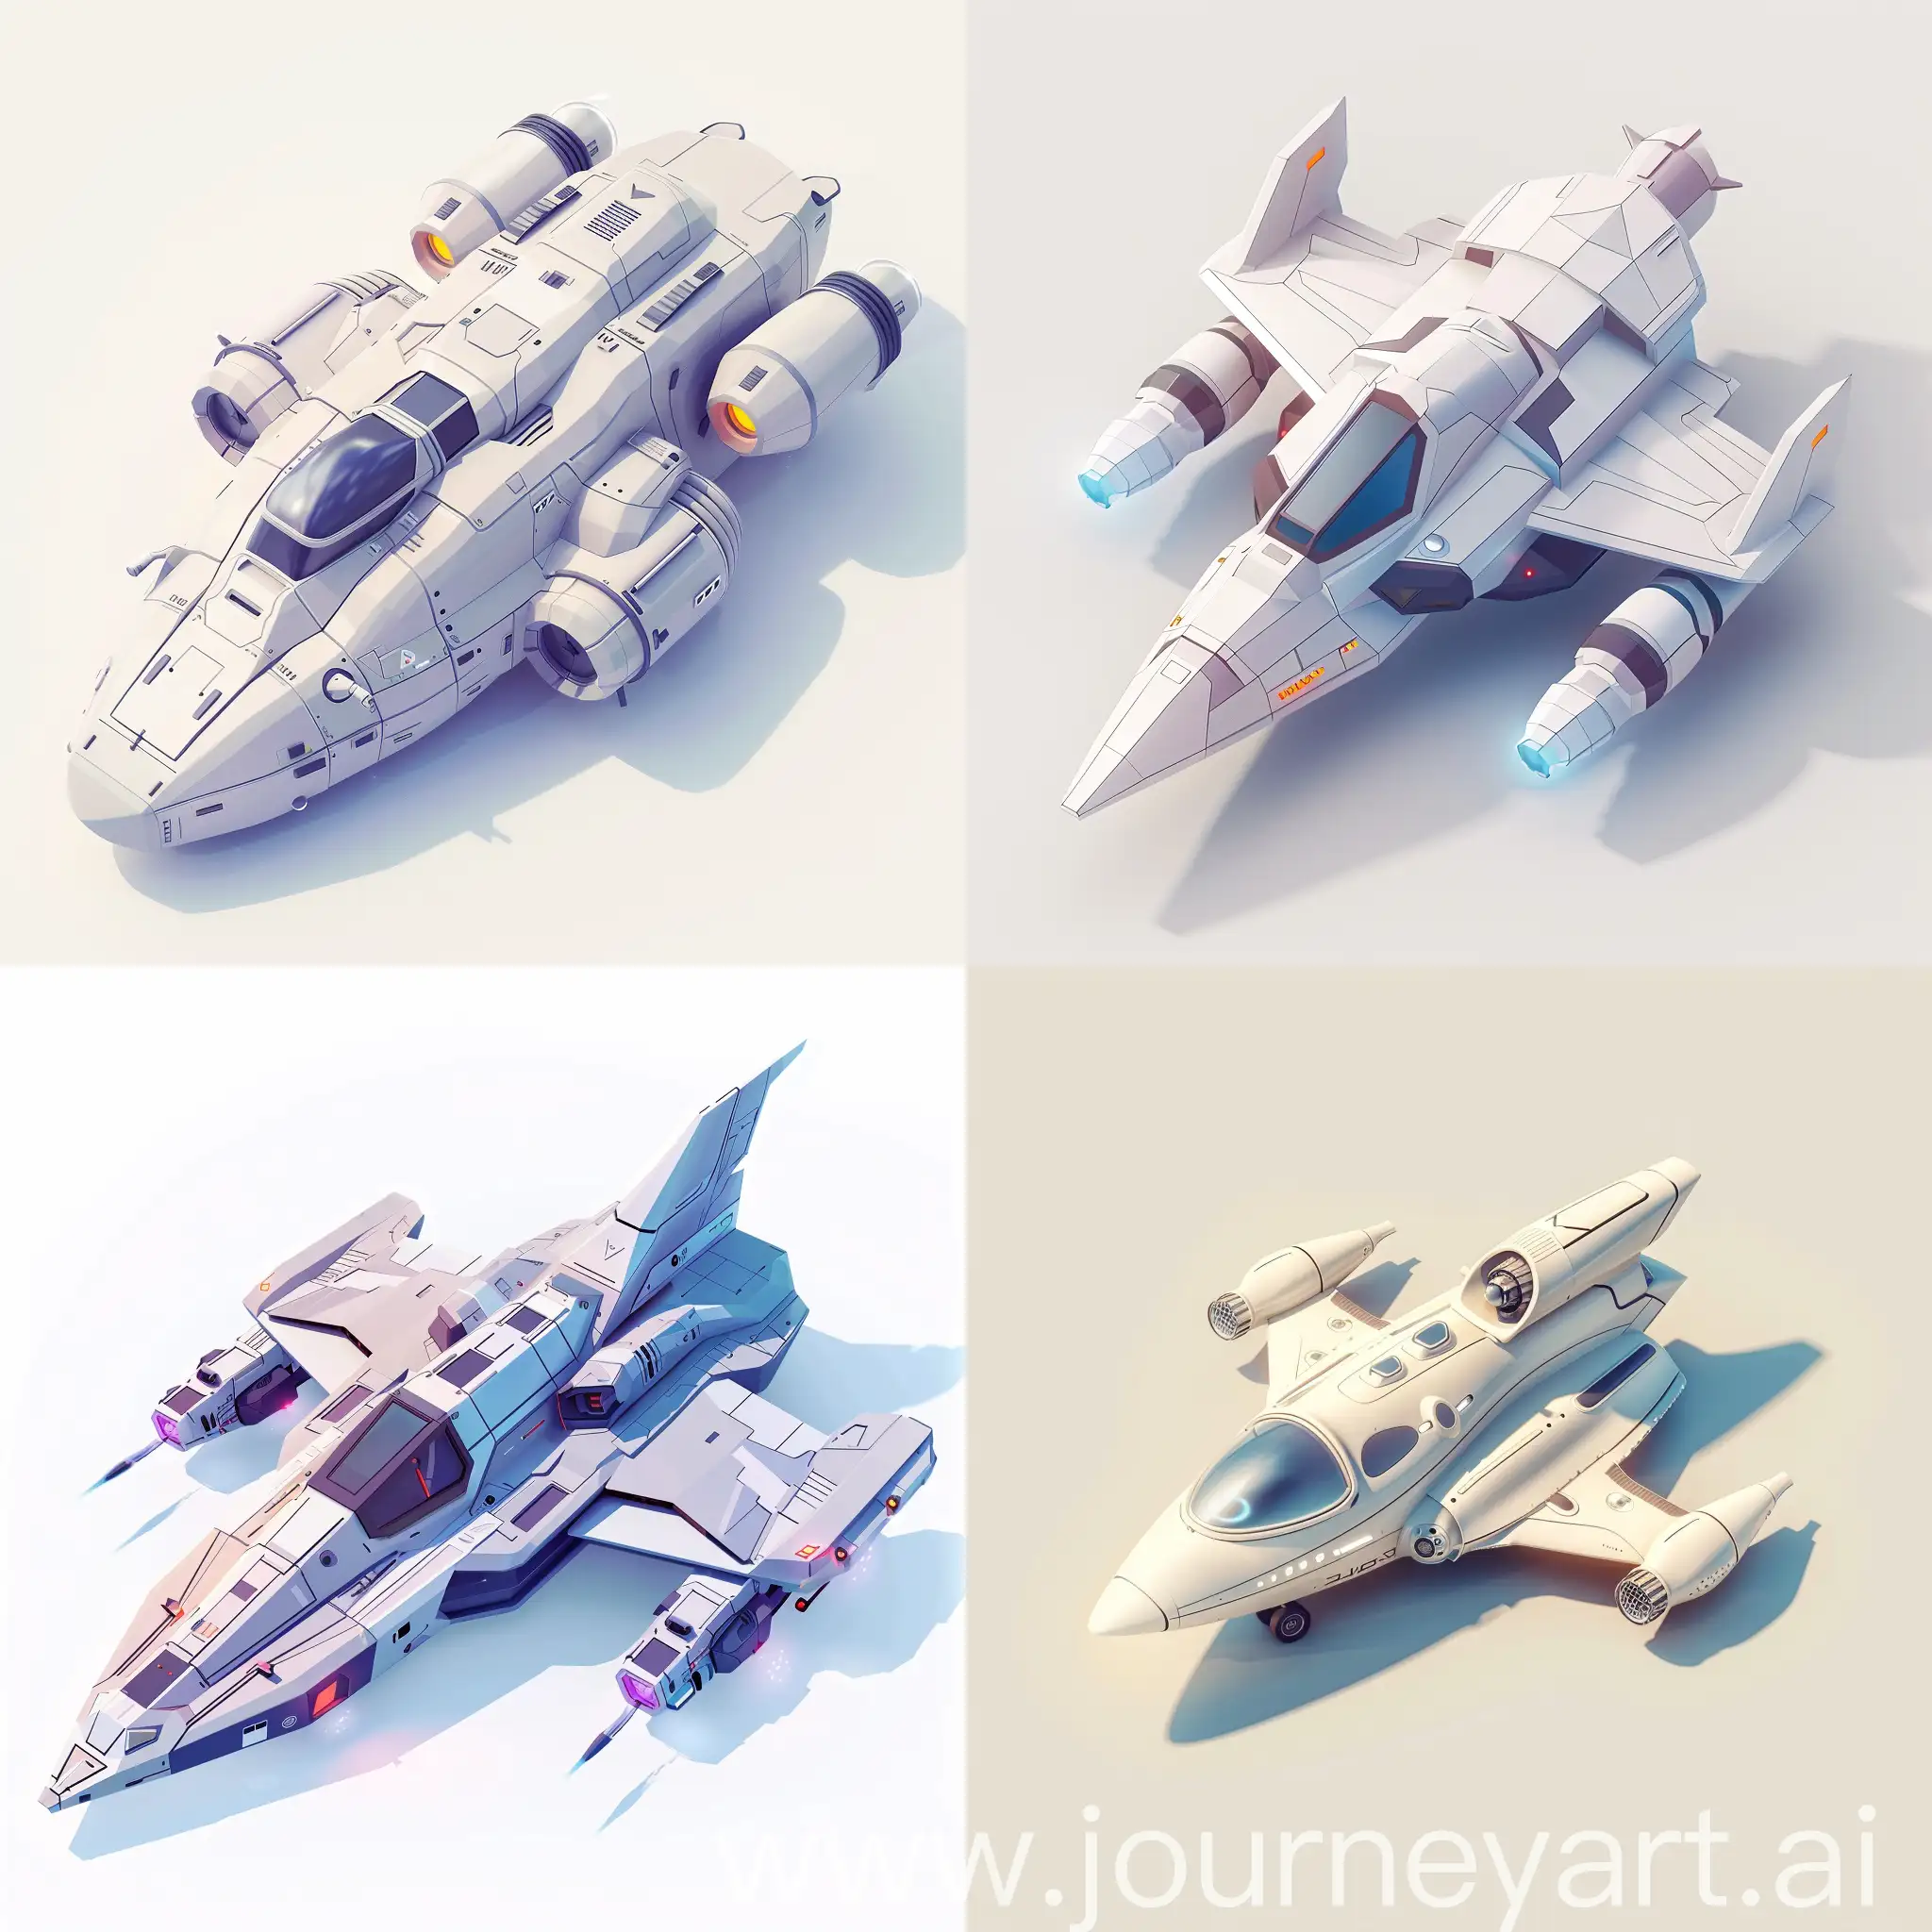 Futuristic-Isometric-Spaceship-Design-with-Soft-Shadows-on-White-Background